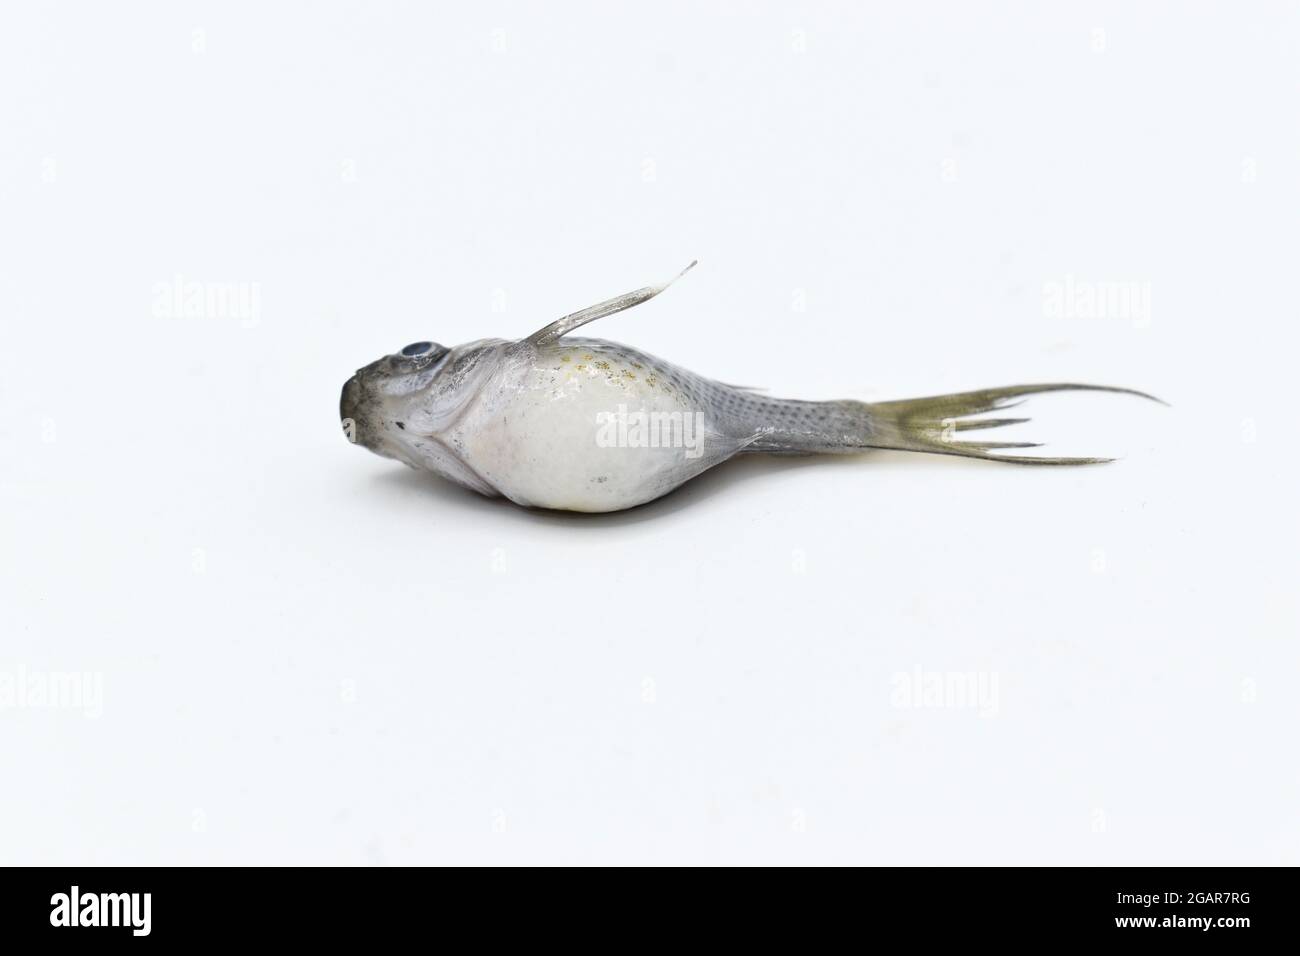 Gray dwarf molly fish died due to bloated abdomen. Stock Photo